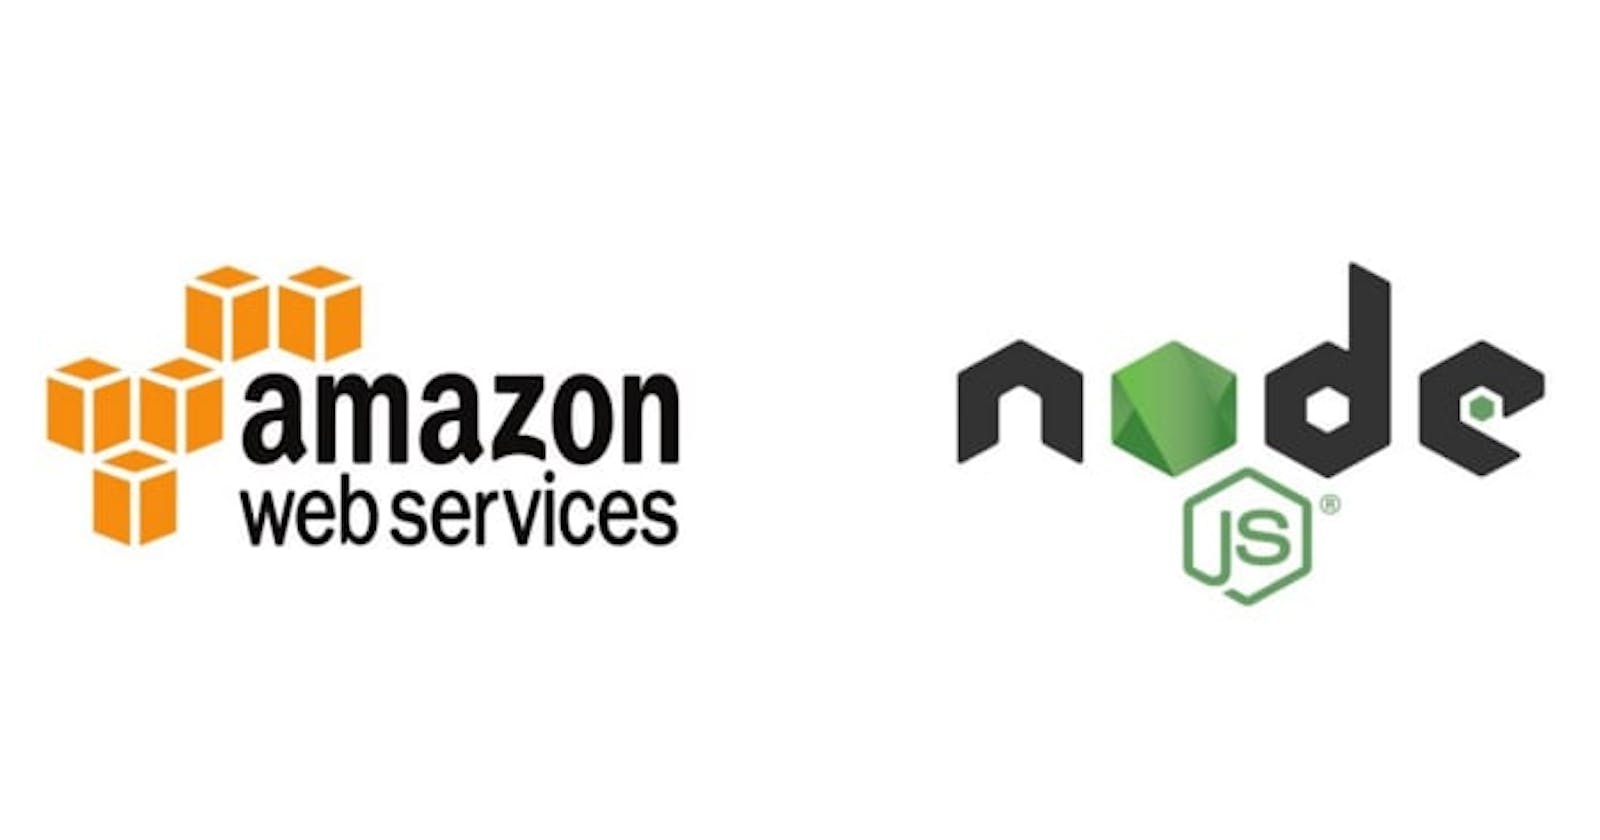 How to get, upload and delete an object from s3 using aws-sdk for nodejs